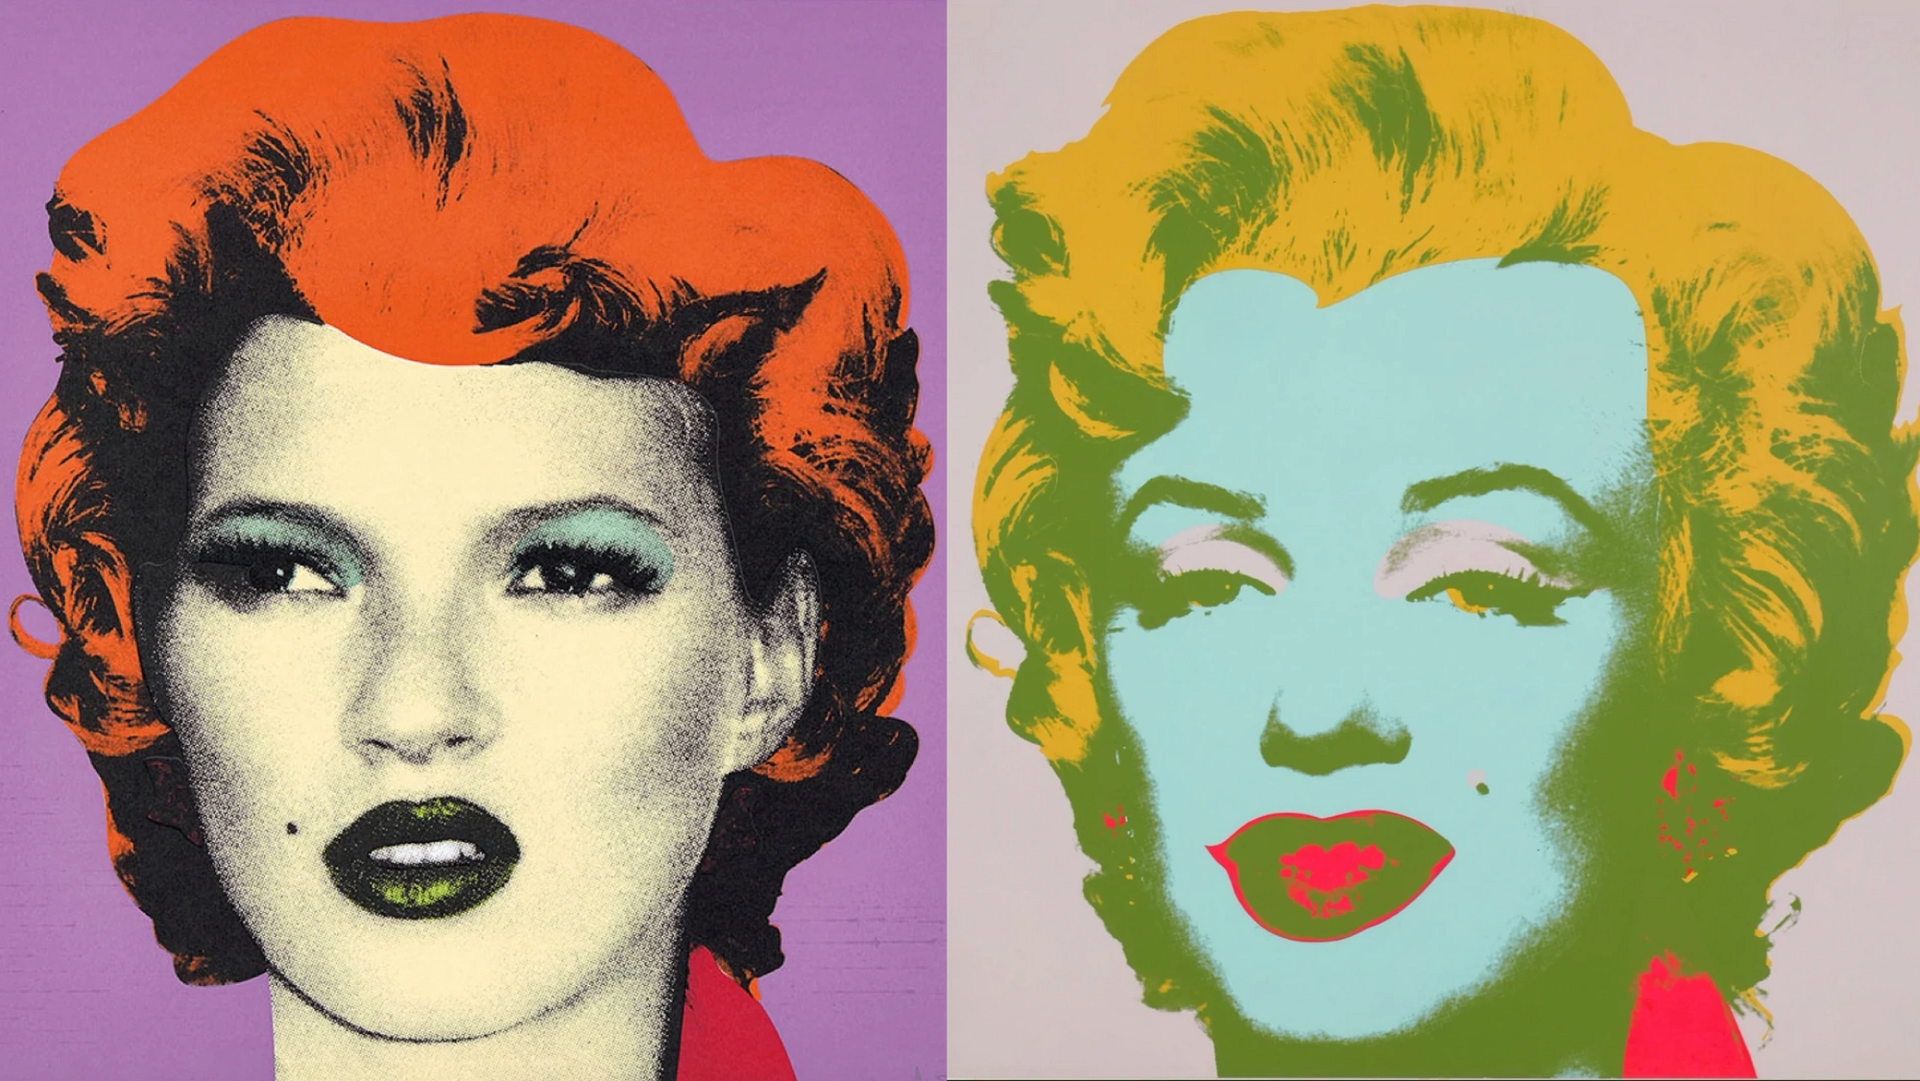 Kate Moss by Banksy / Marilyn by Andy Warhol 